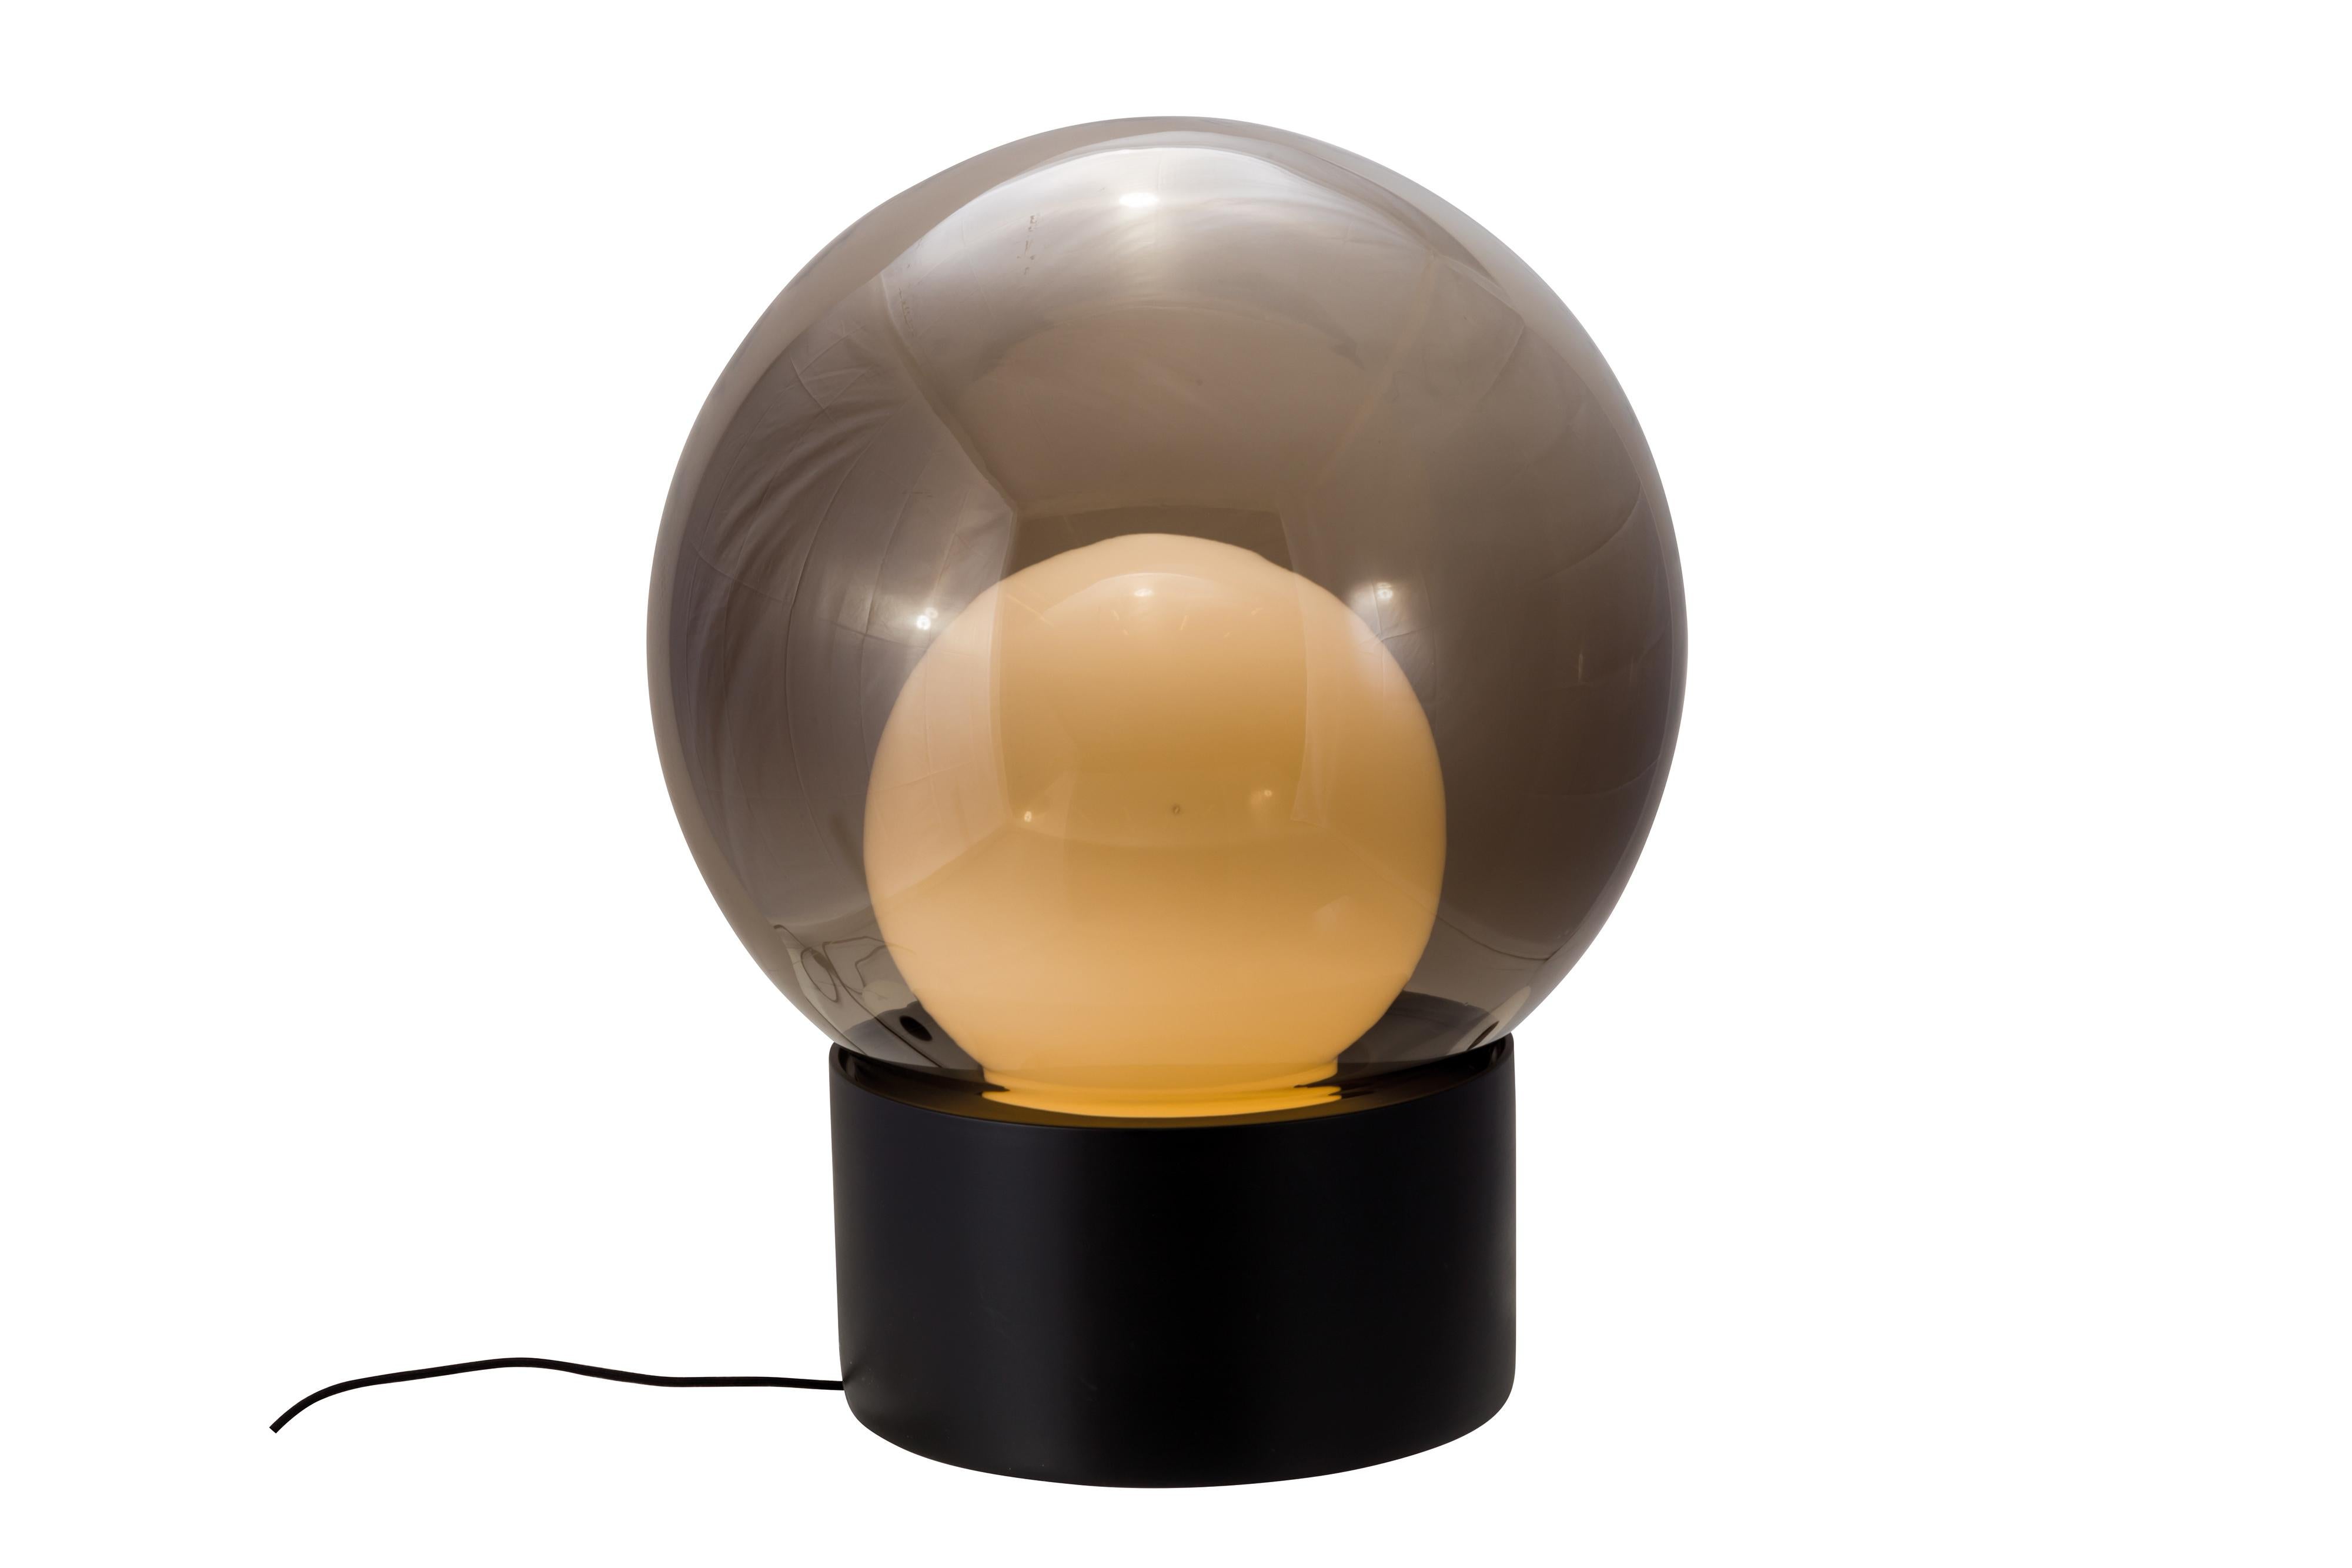 Boule medium smoky grey opal white black floor lamp by Pulpo.
Dimensions: D58 x H74cm.
Materials: ceramic, handblown glass, coloured, textile.

Also available in different finishes: transparent opal white black, transparent smoky grey black,